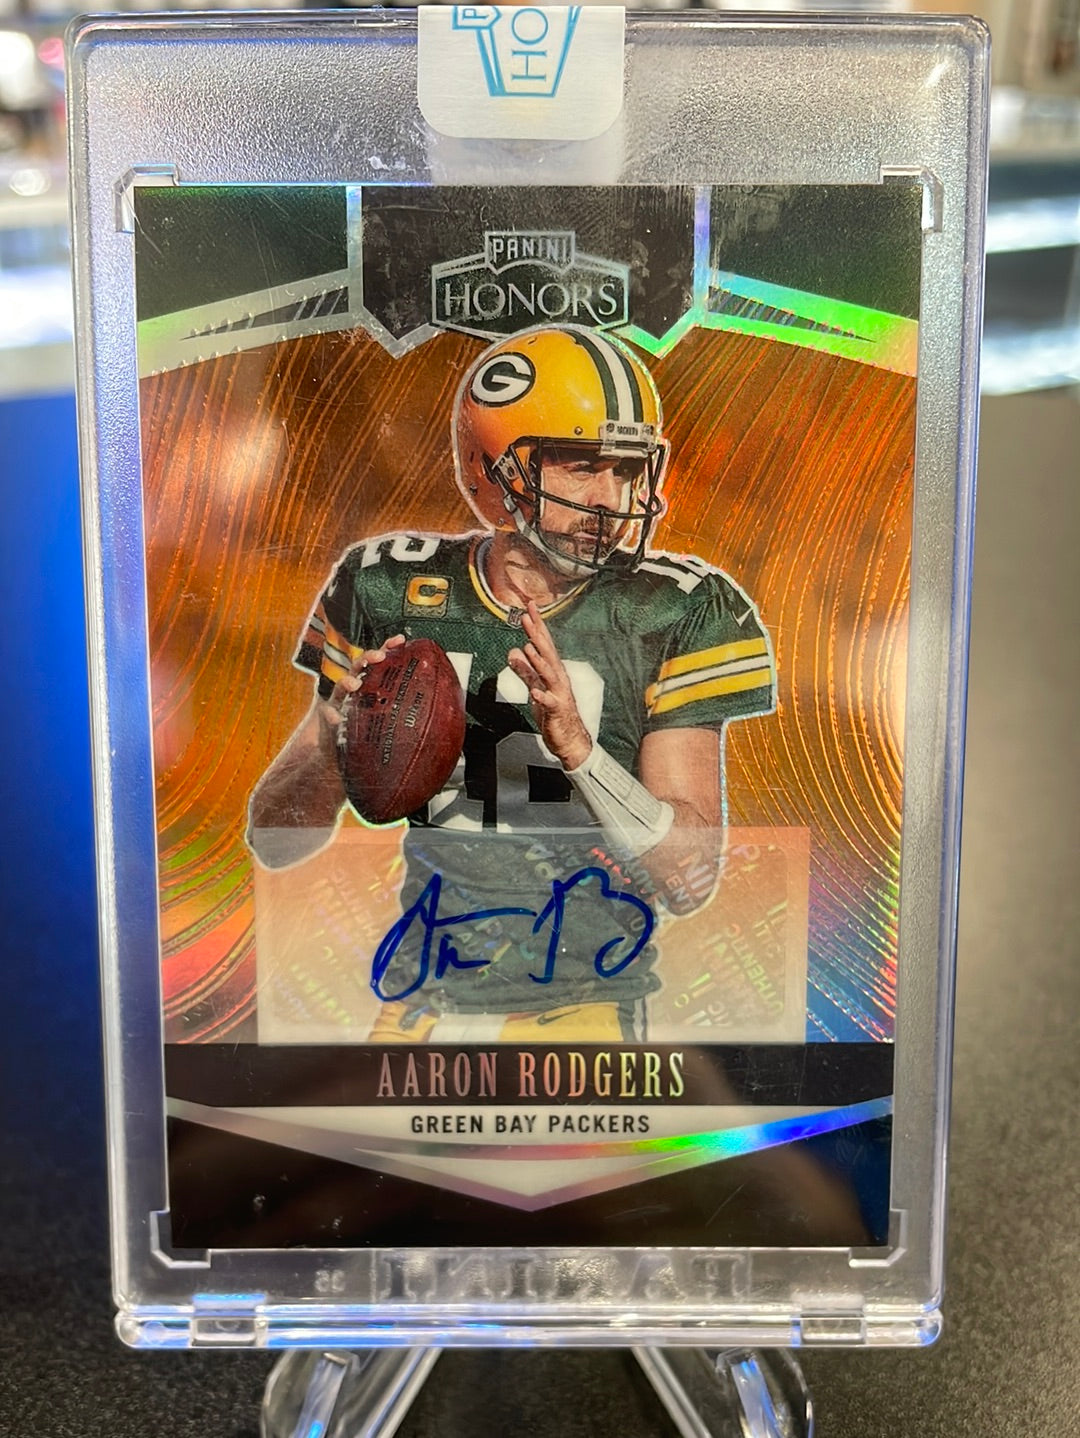 Aaron Rodgers 2022 Panini Honors Gold Autograph, 1/5